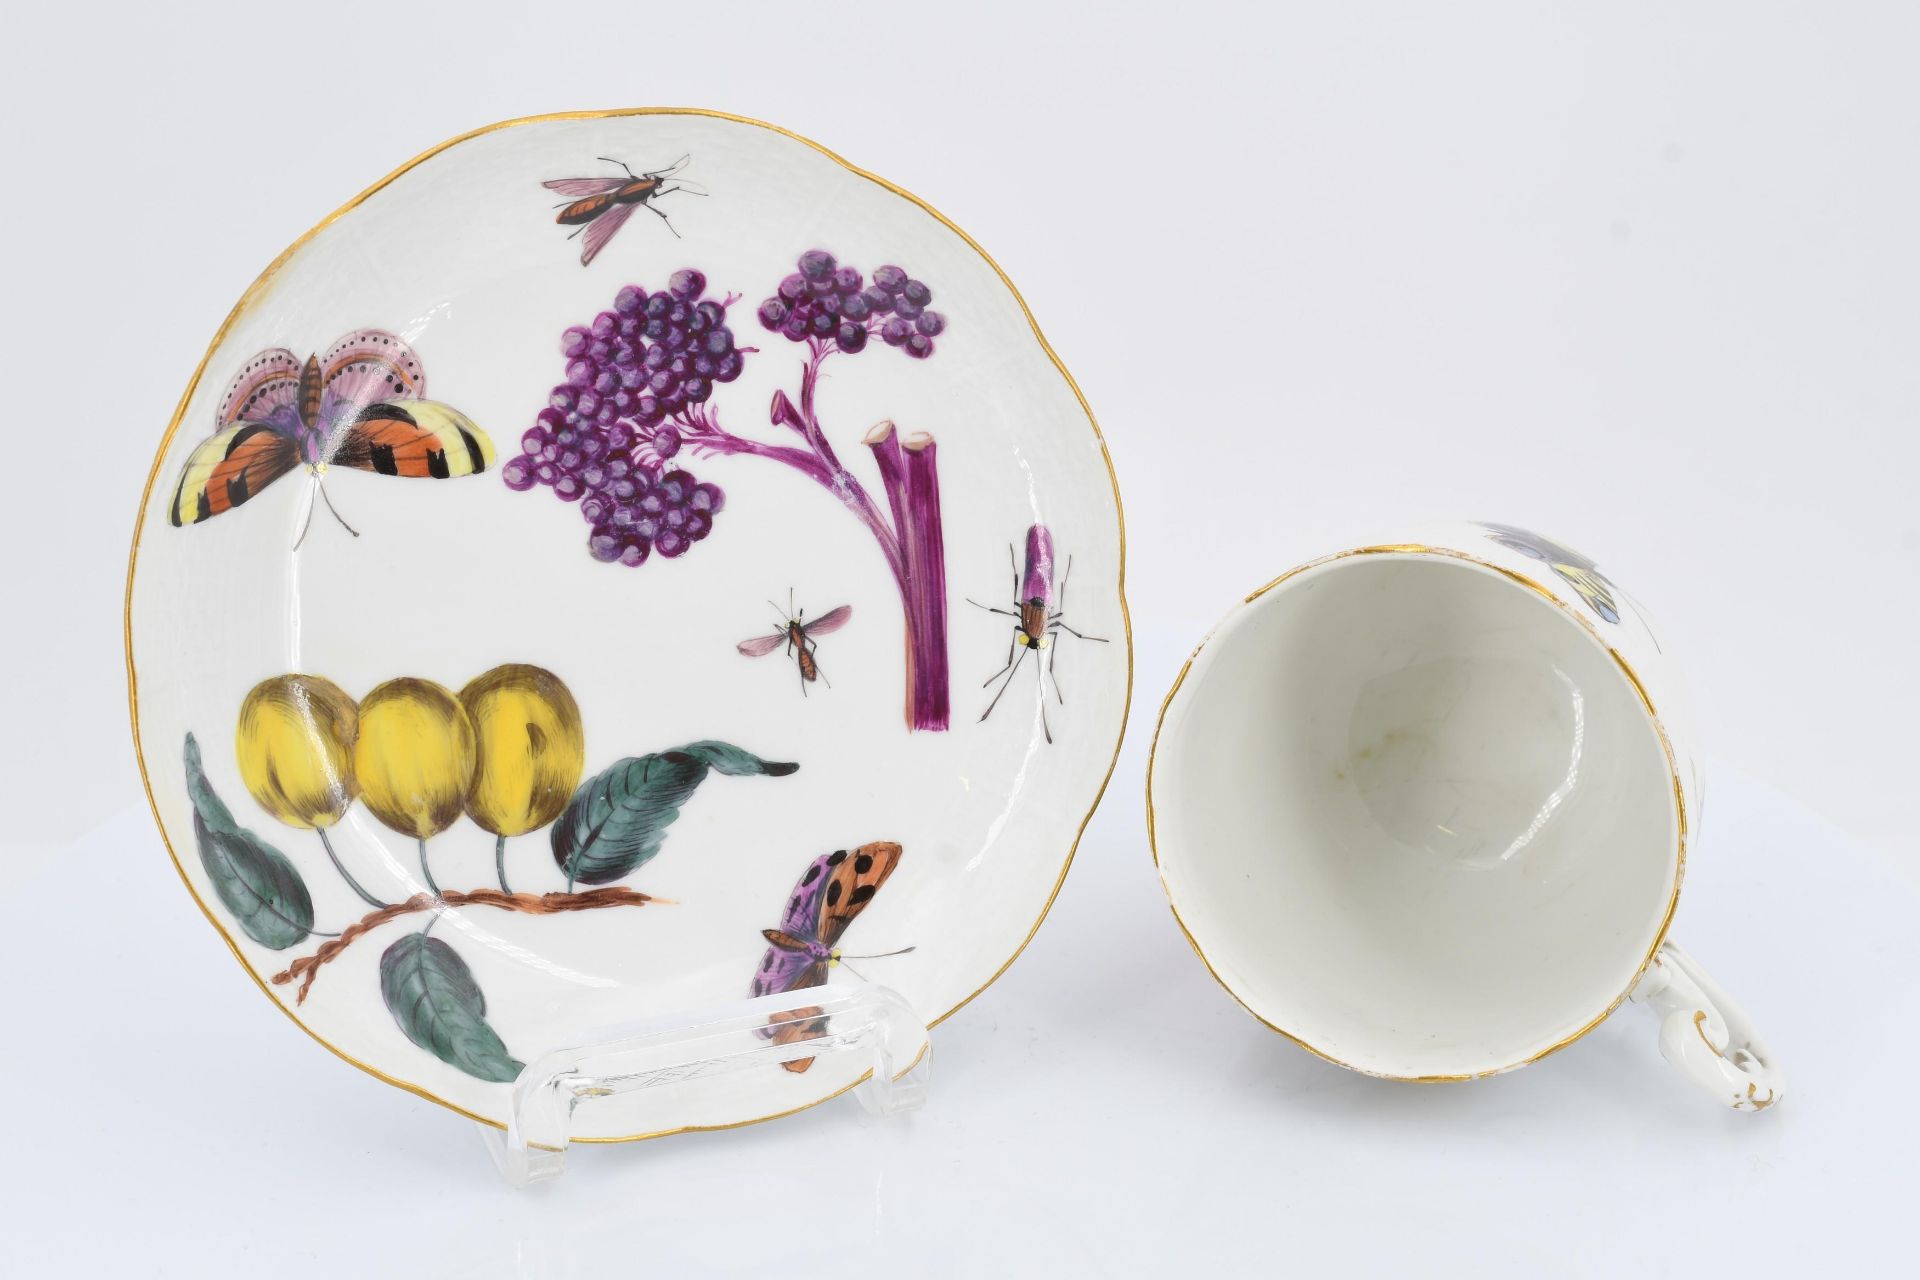 Cup and saucer with fruits and insects - Image 6 of 7